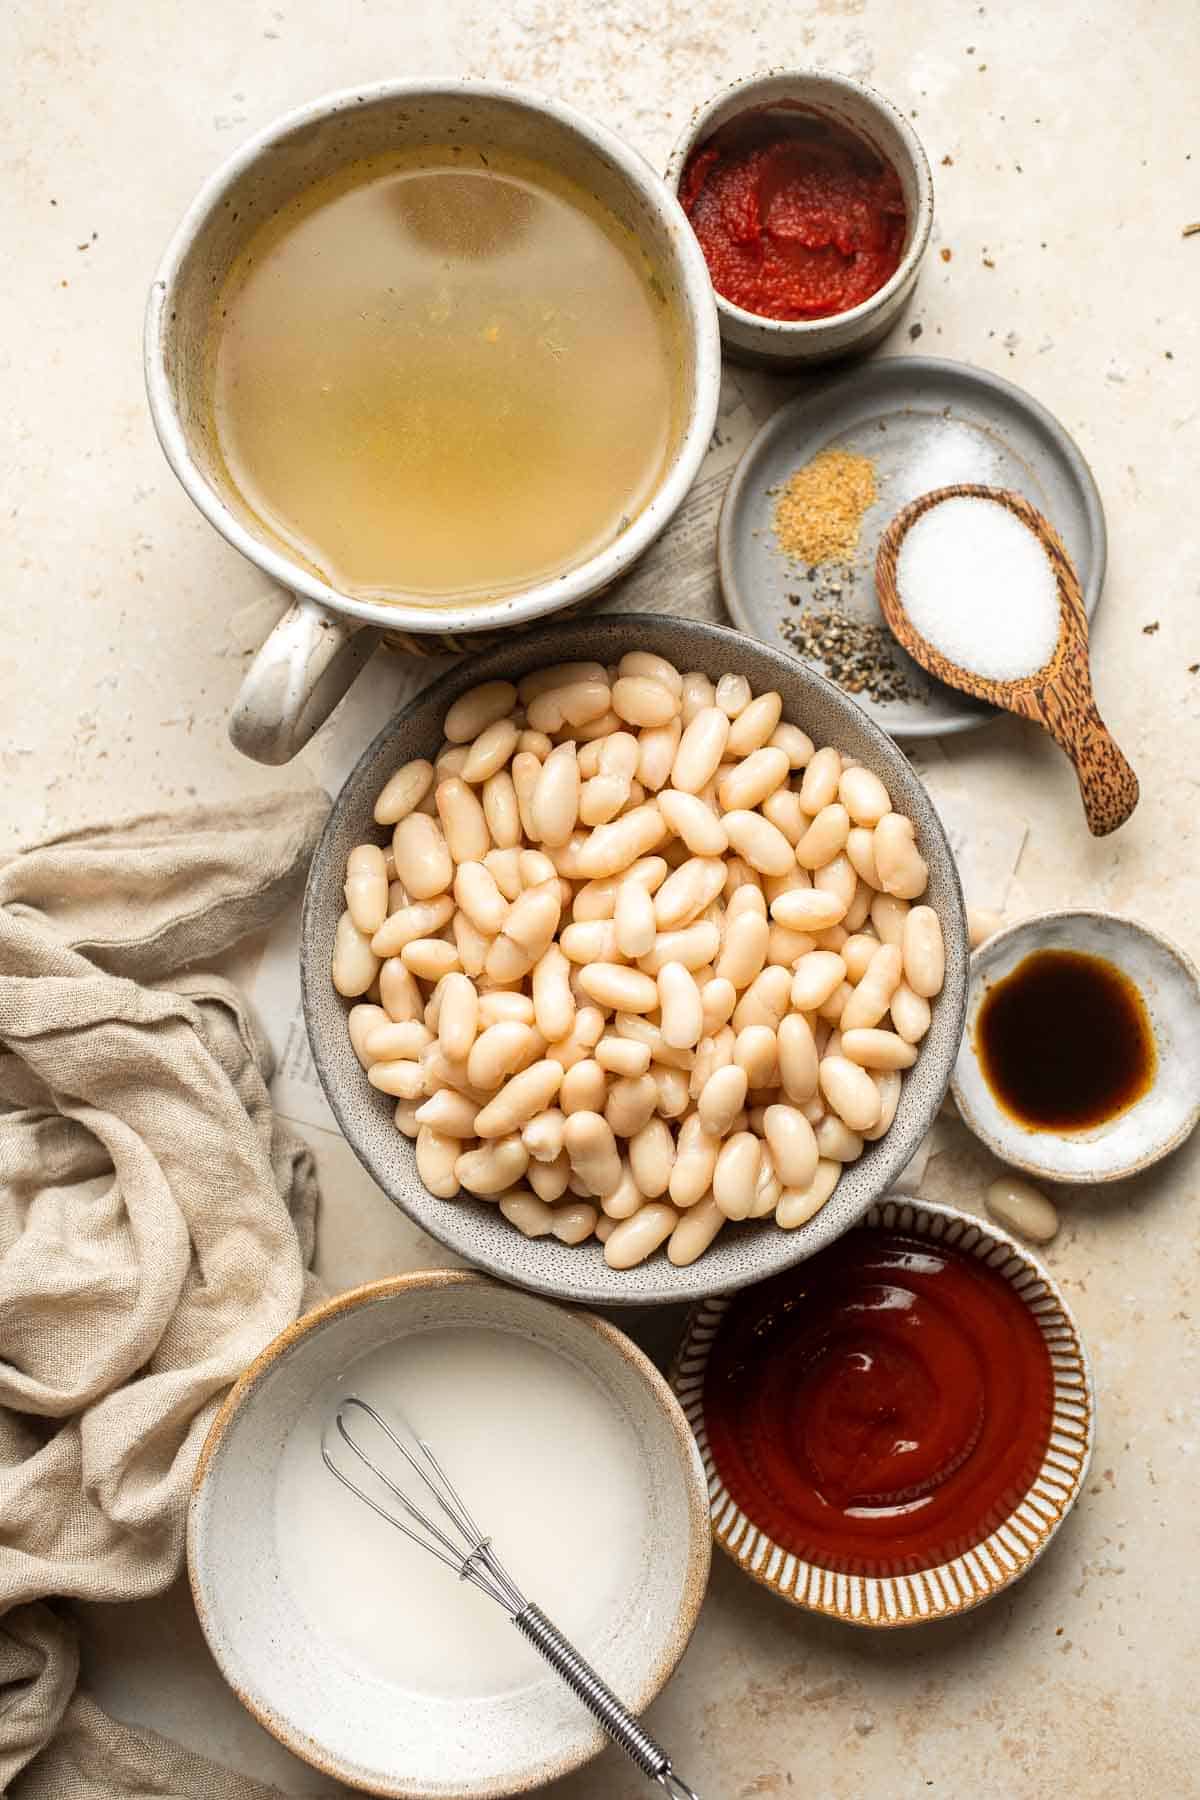 Homemade Baked Beans are the perfect side dish with their sweet and savory flavor, tender beans, and glossy sauce. So much better than canned baked beans! | aheadofthyme.com